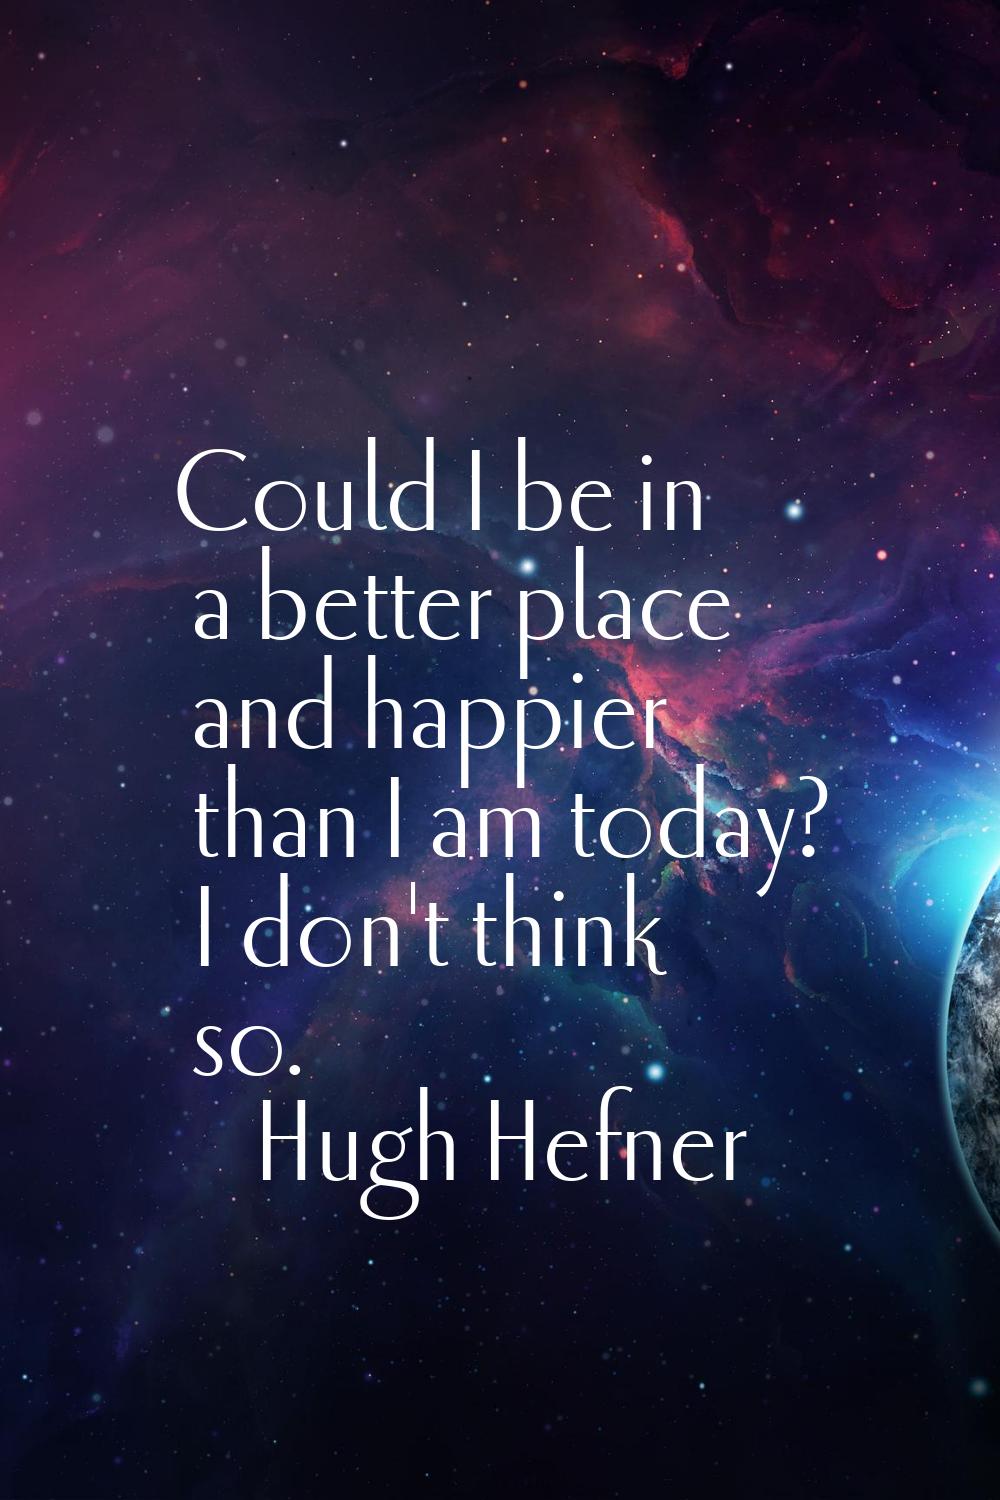 Could I be in a better place and happier than I am today? I don't think so.